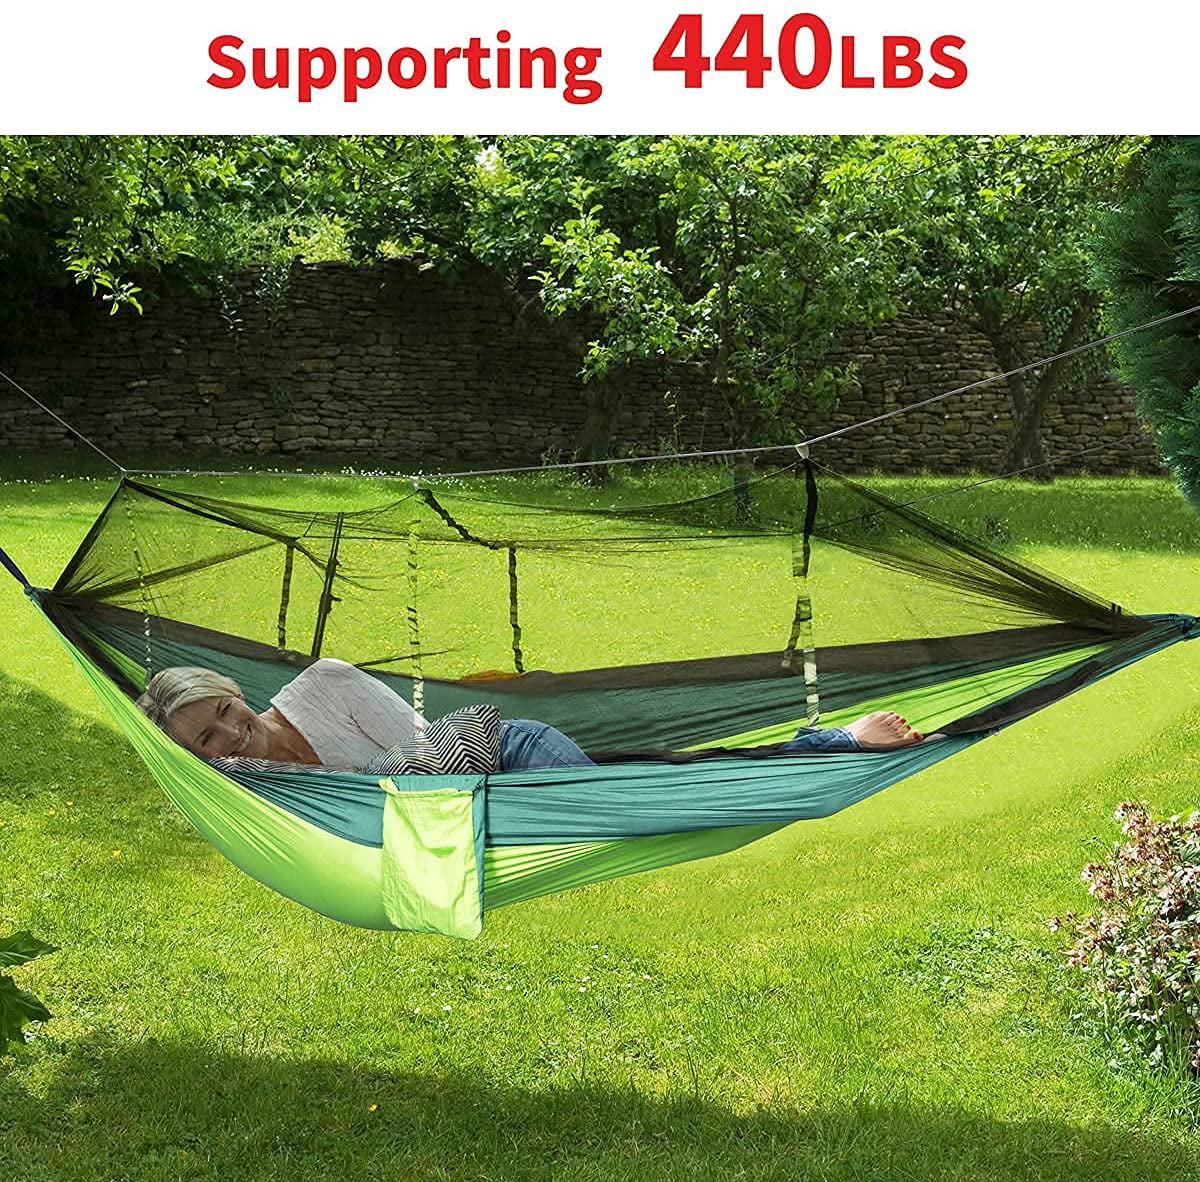 Beach Lightweight Portable Nylon Parachute Hammock for Backpacking Hammock Straps & Steel Carabiners Included Neolite Double Camping Hammock Travel Yard 